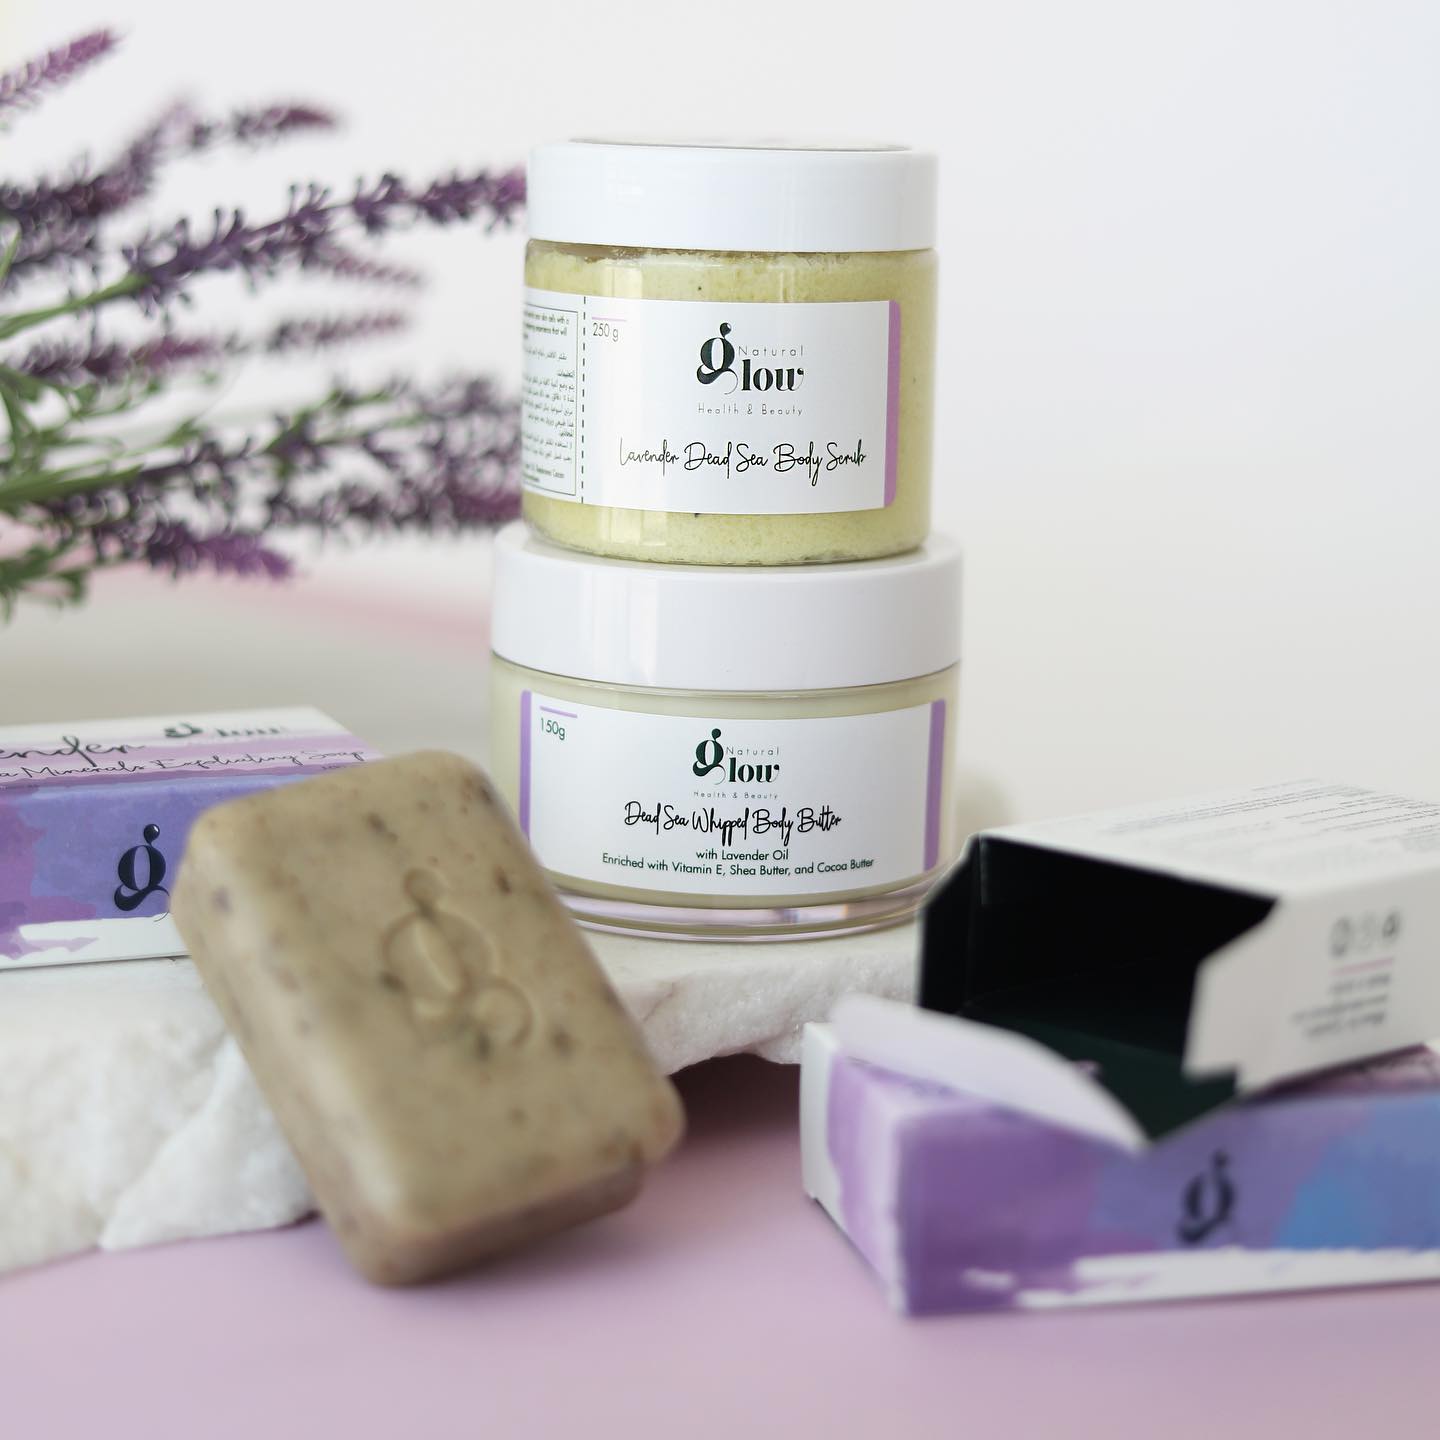 Skin Care Package with Lavender Oil